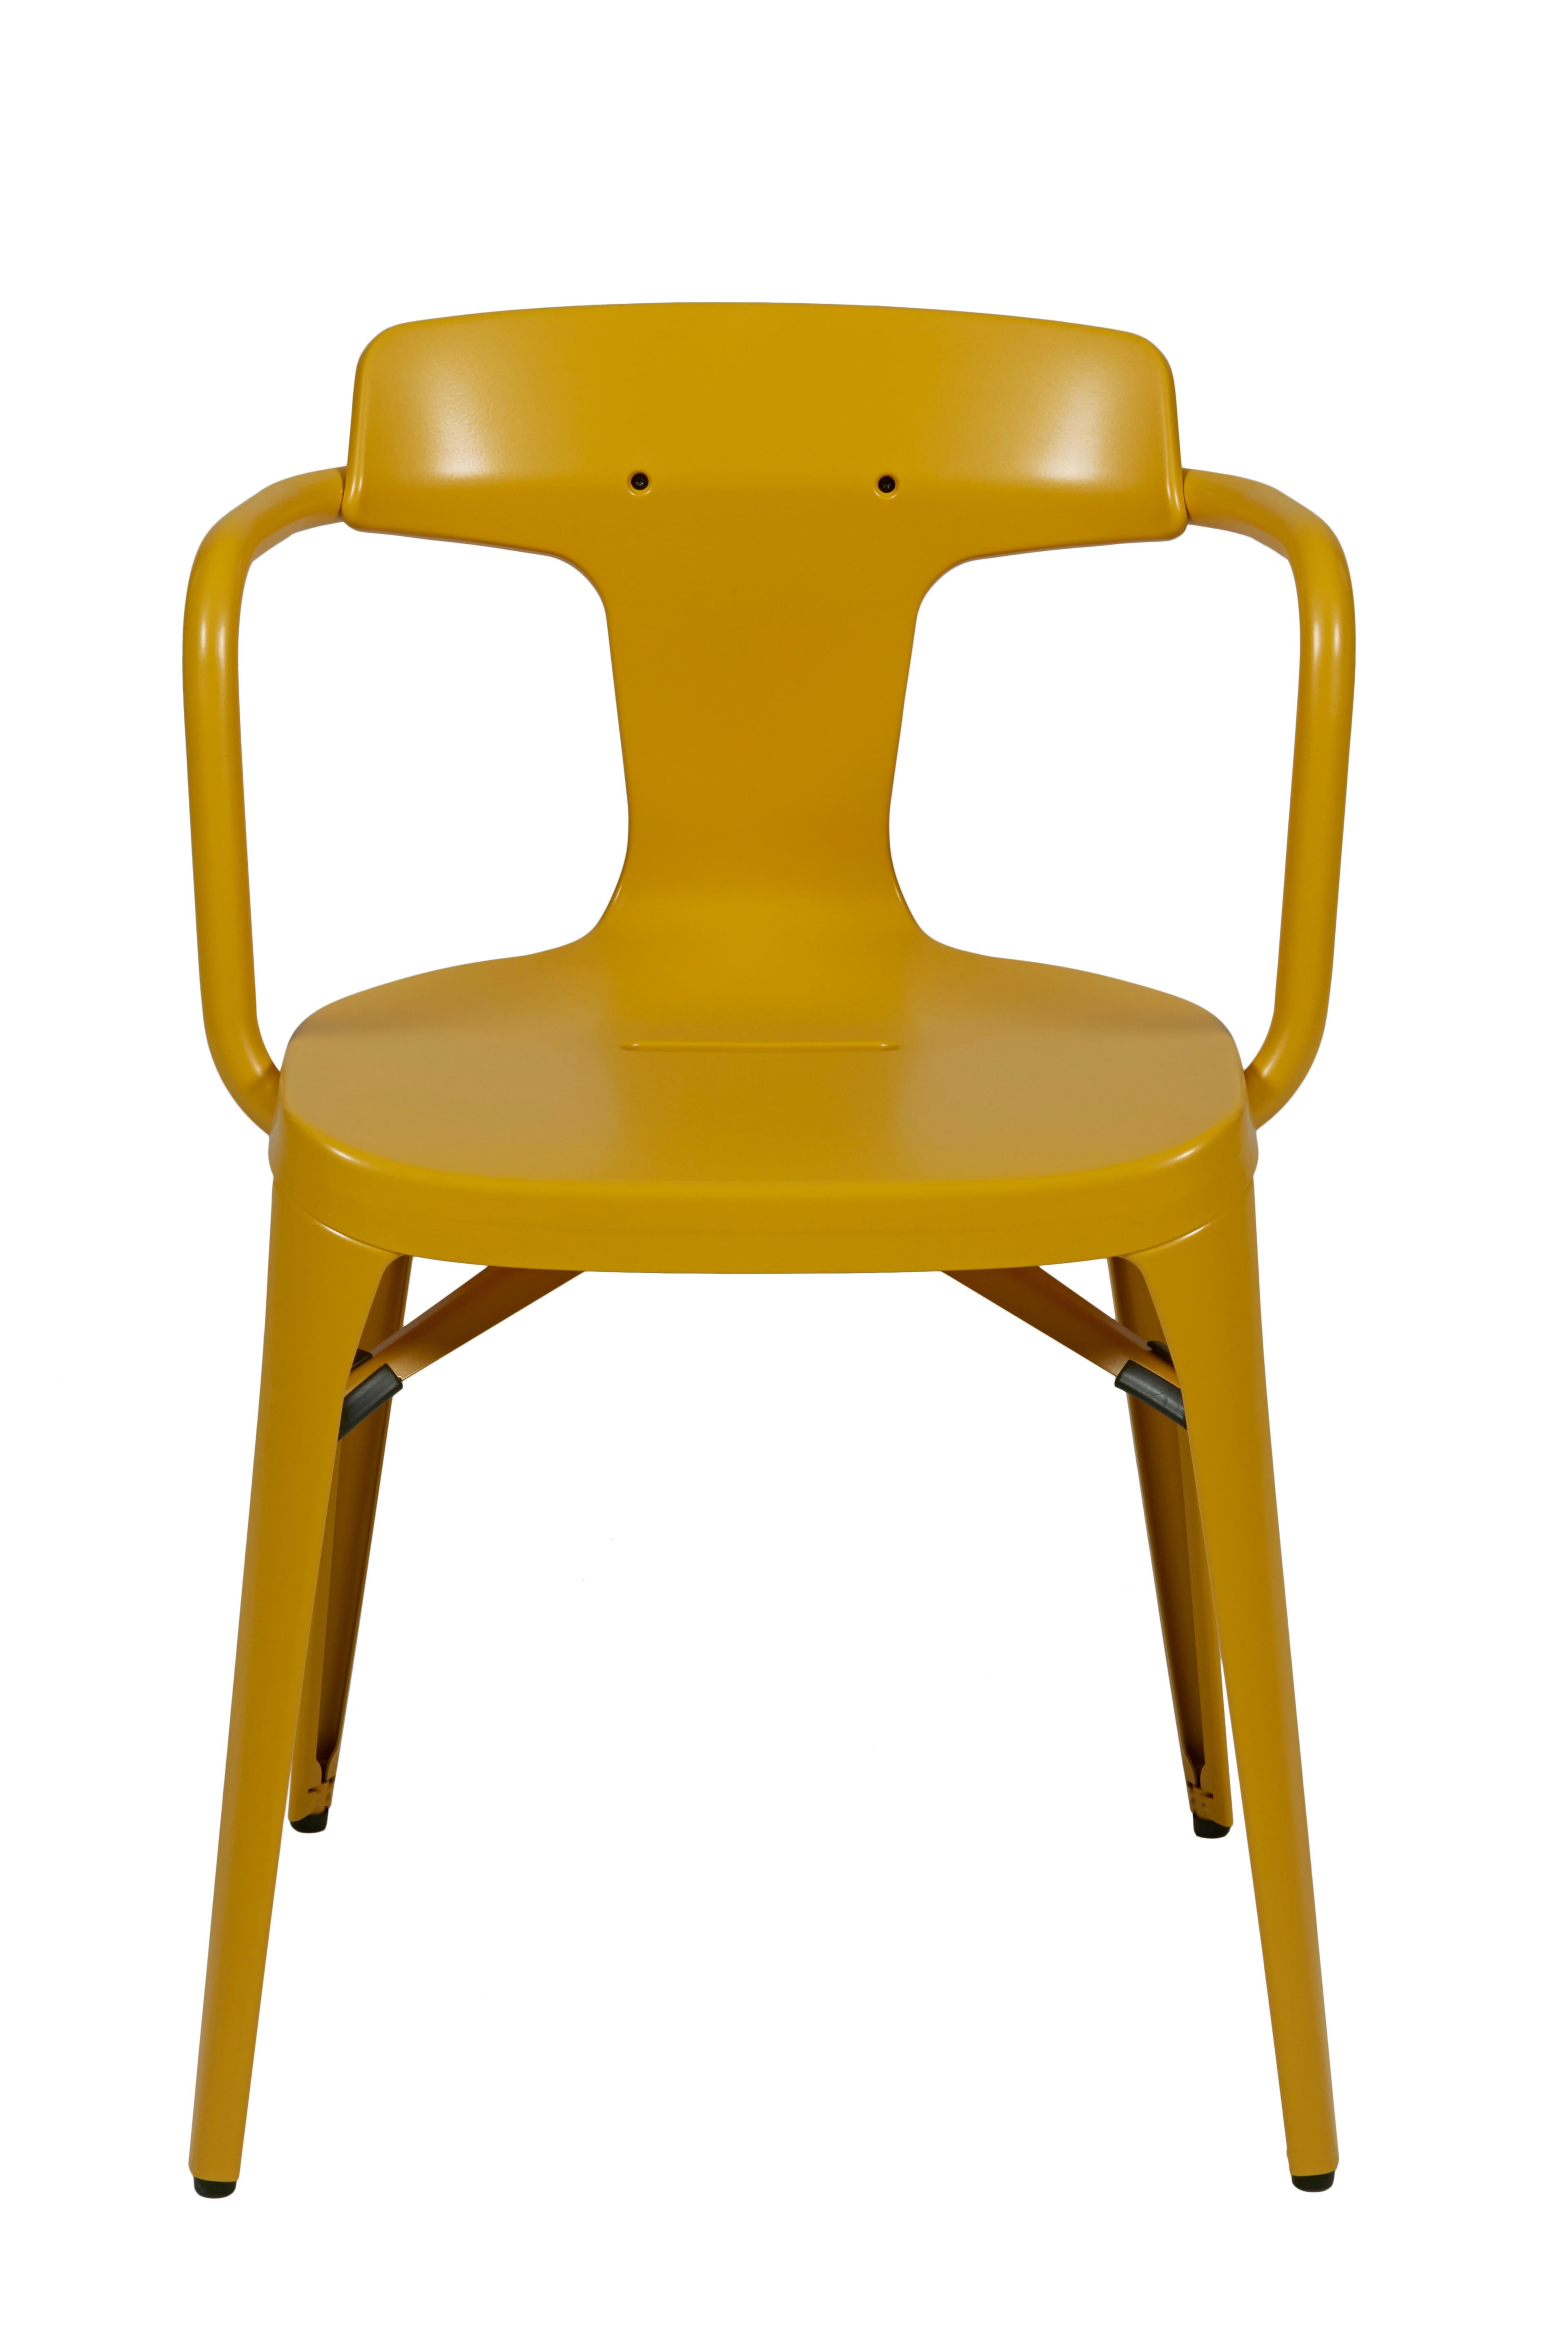 Im Angebot: T14 Chair in Pop Colors by Patrick Norguet and Tolix, Orange (Jaune Moutarde)